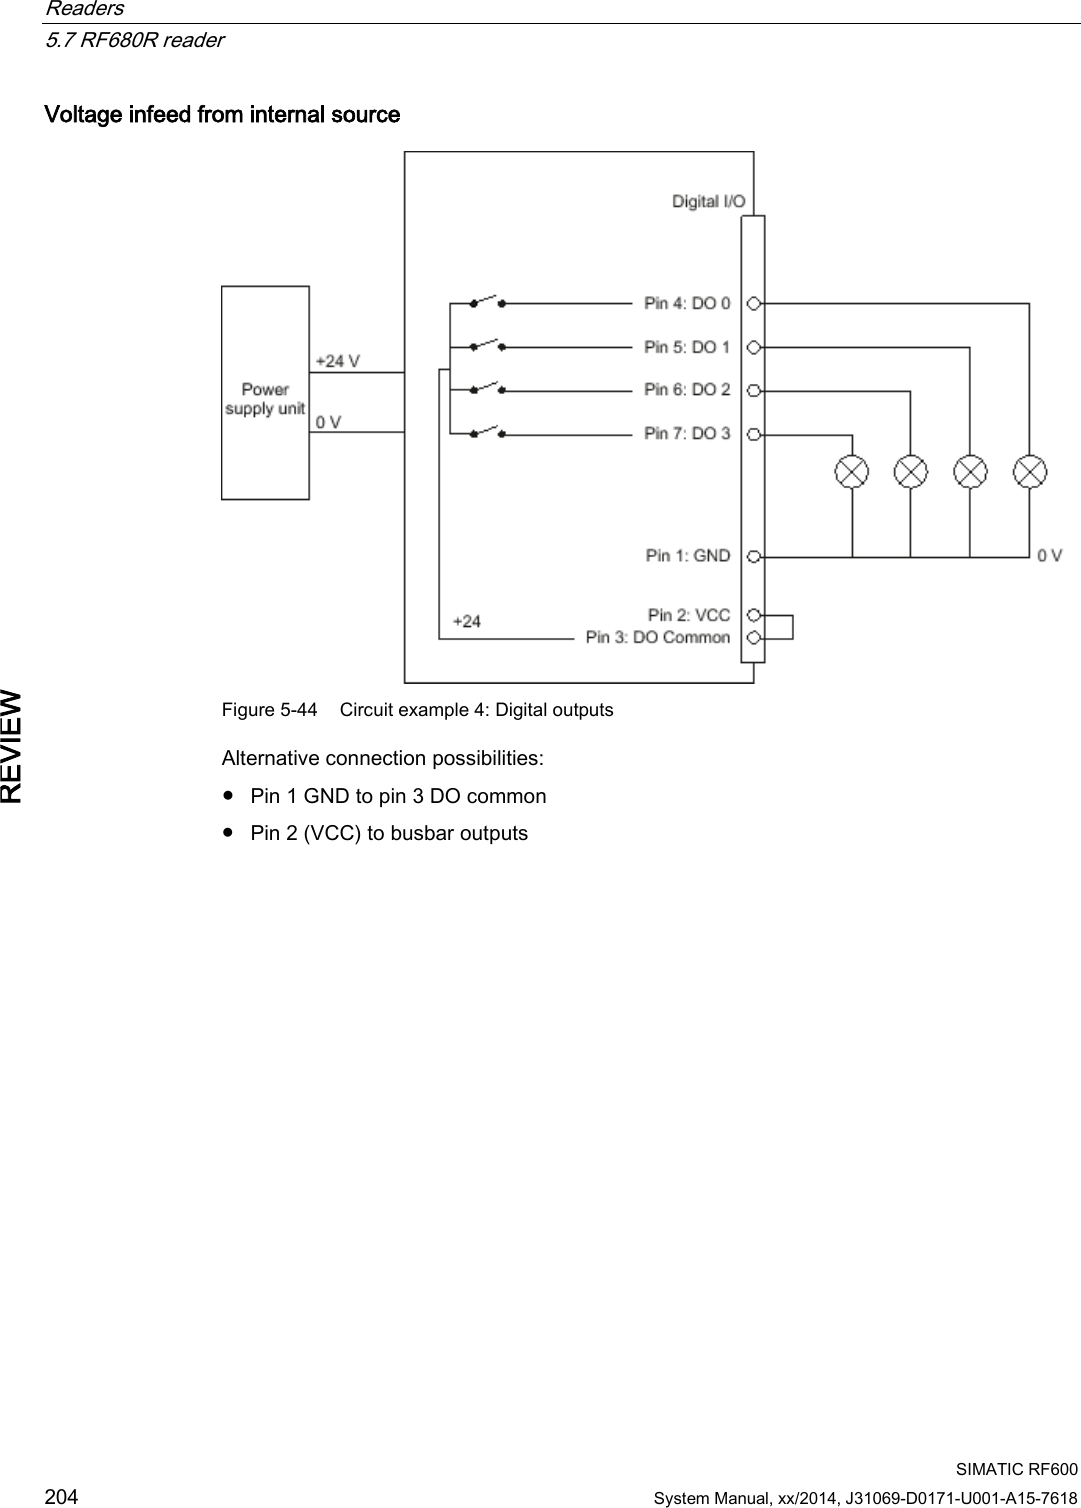 Readers   5.7 RF680R reader  SIMATIC RF600 204 System Manual, xx/2014, J31069-D0171-U001-A15-7618 REVIEW Voltage infeed from internal source  Figure 5-44 Circuit example 4: Digital outputs Alternative connection possibilities: ● Pin 1 GND to pin 3 DO common ● Pin 2 (VCC) to busbar outputs 